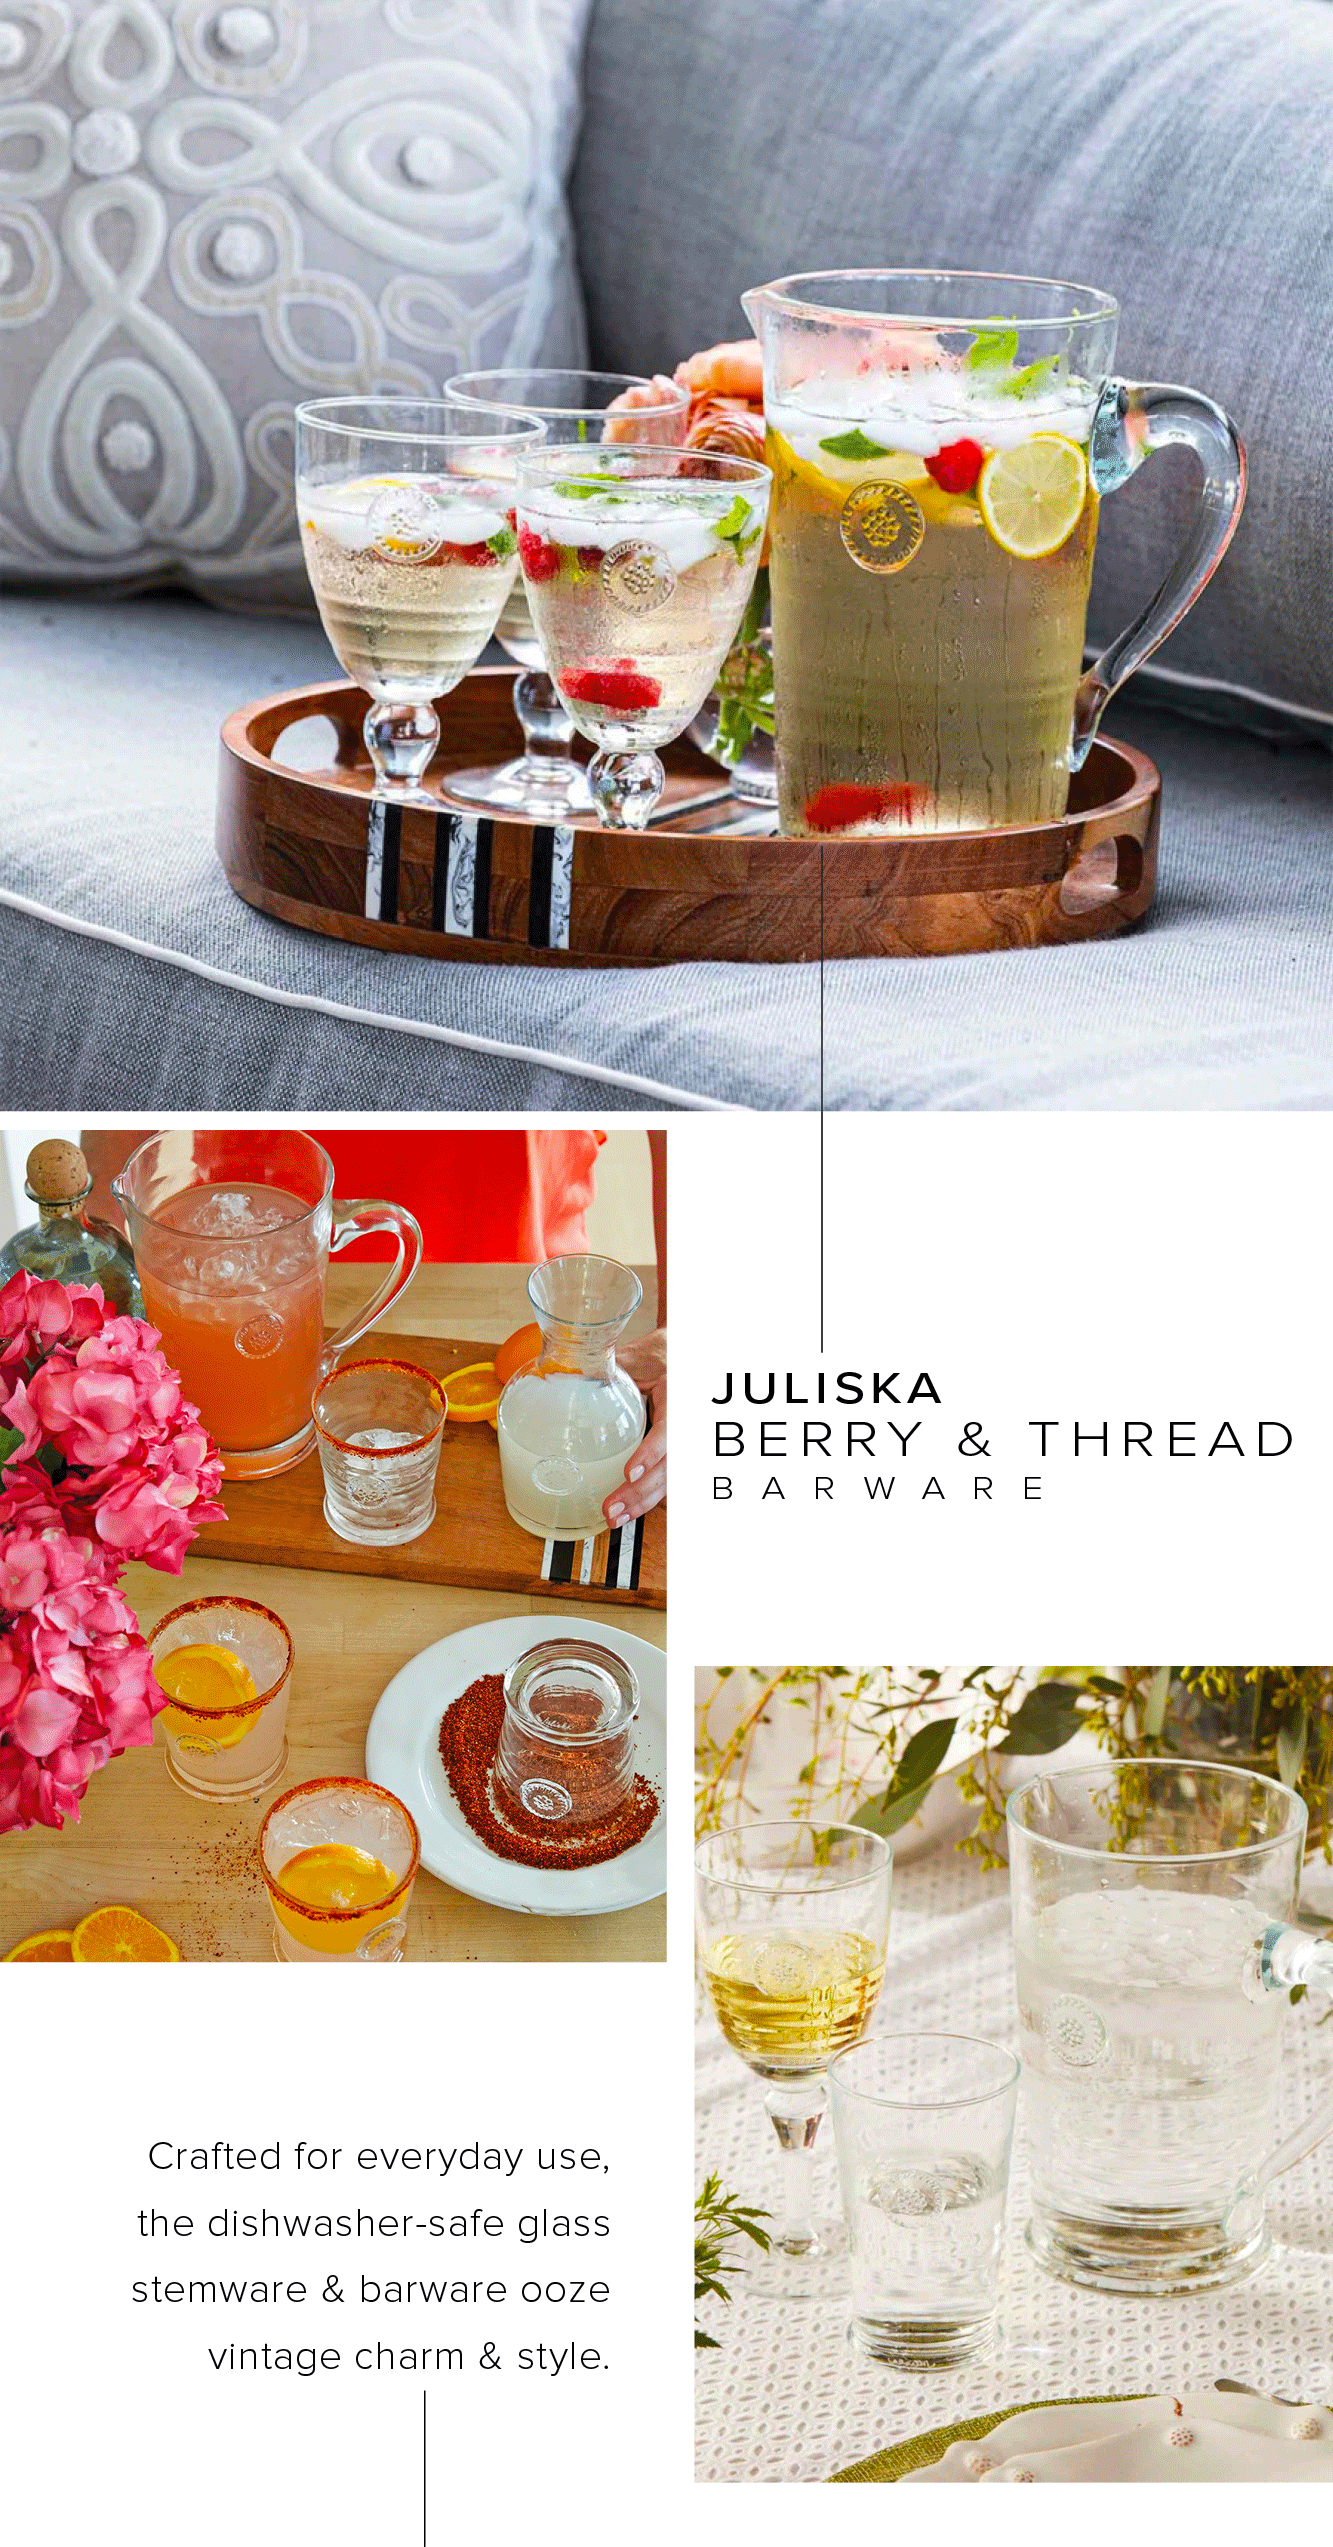  JULISKA BERRY THREAD Crafted for everyday use, the dishwasher-safe glass 7 stemware barware ooze vintage charm style. 